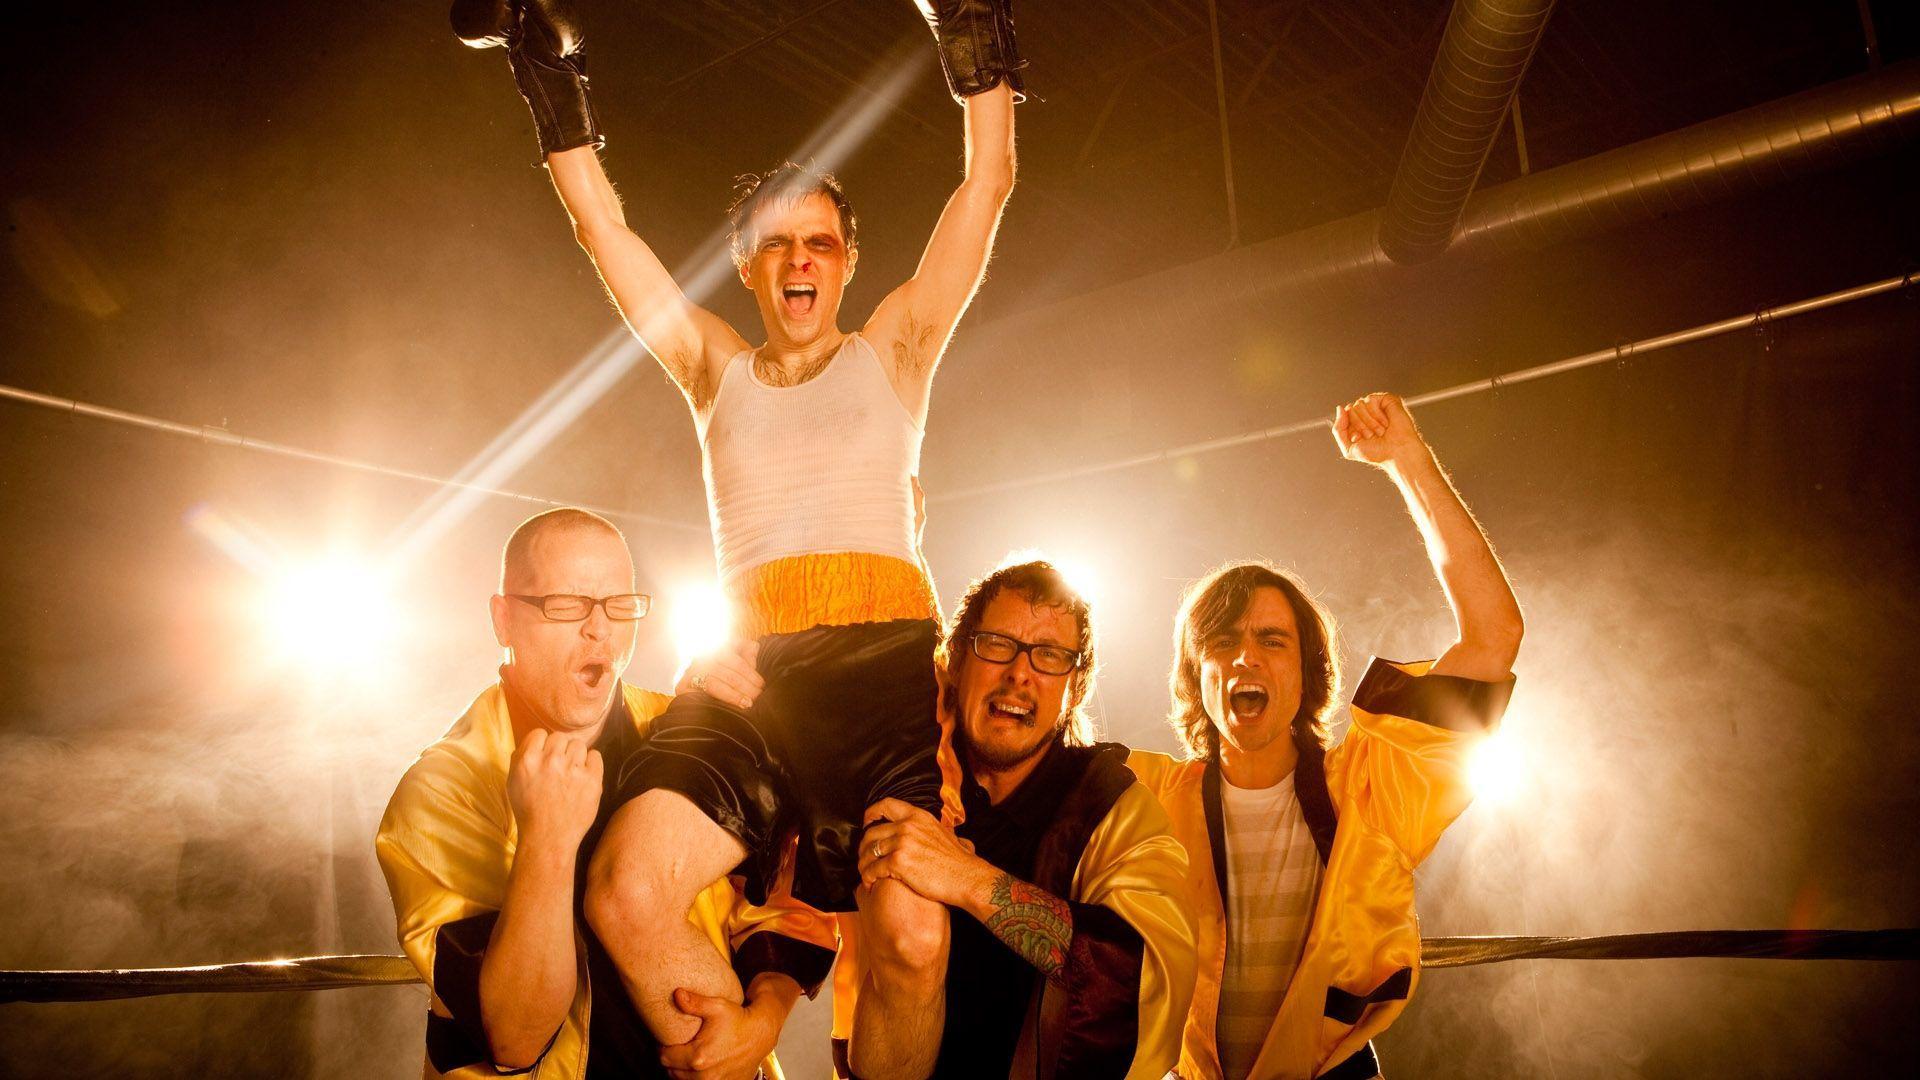 Download Wallpaper 1920x1080 Weezer, Victory, Ring, Glasses